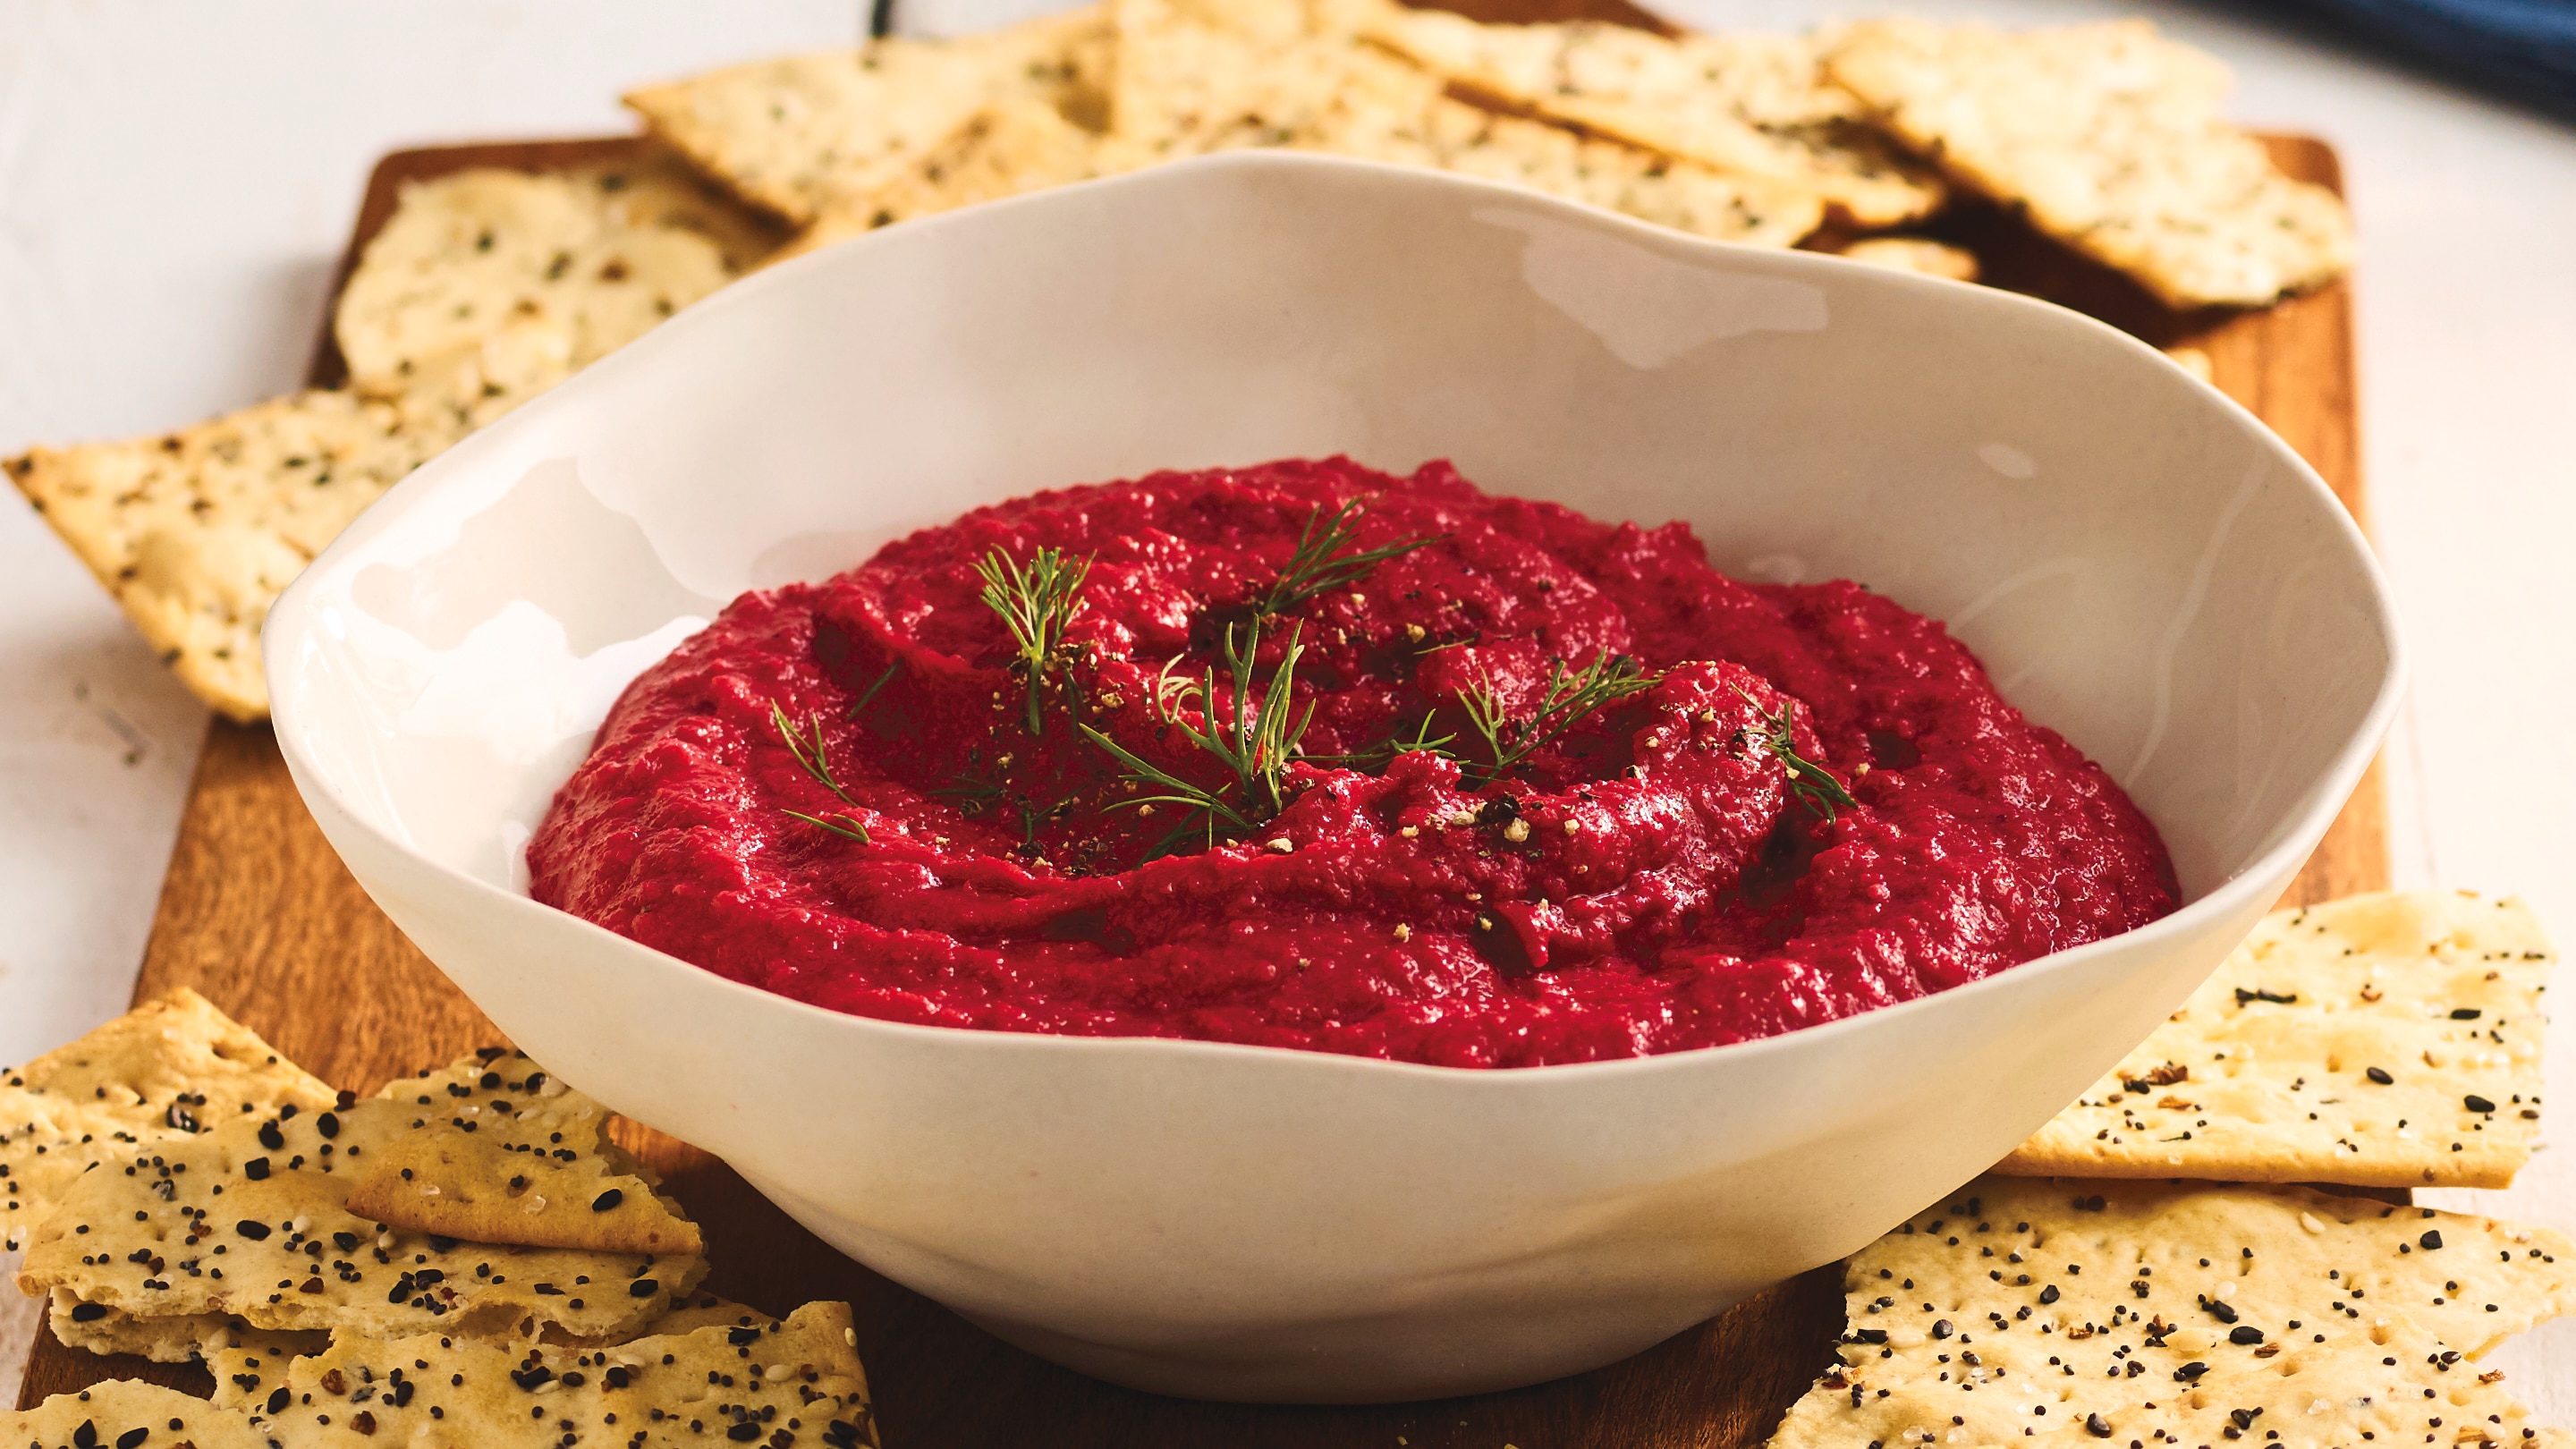 Purple beet hummus in a bowl surrounded by multigrain crackers